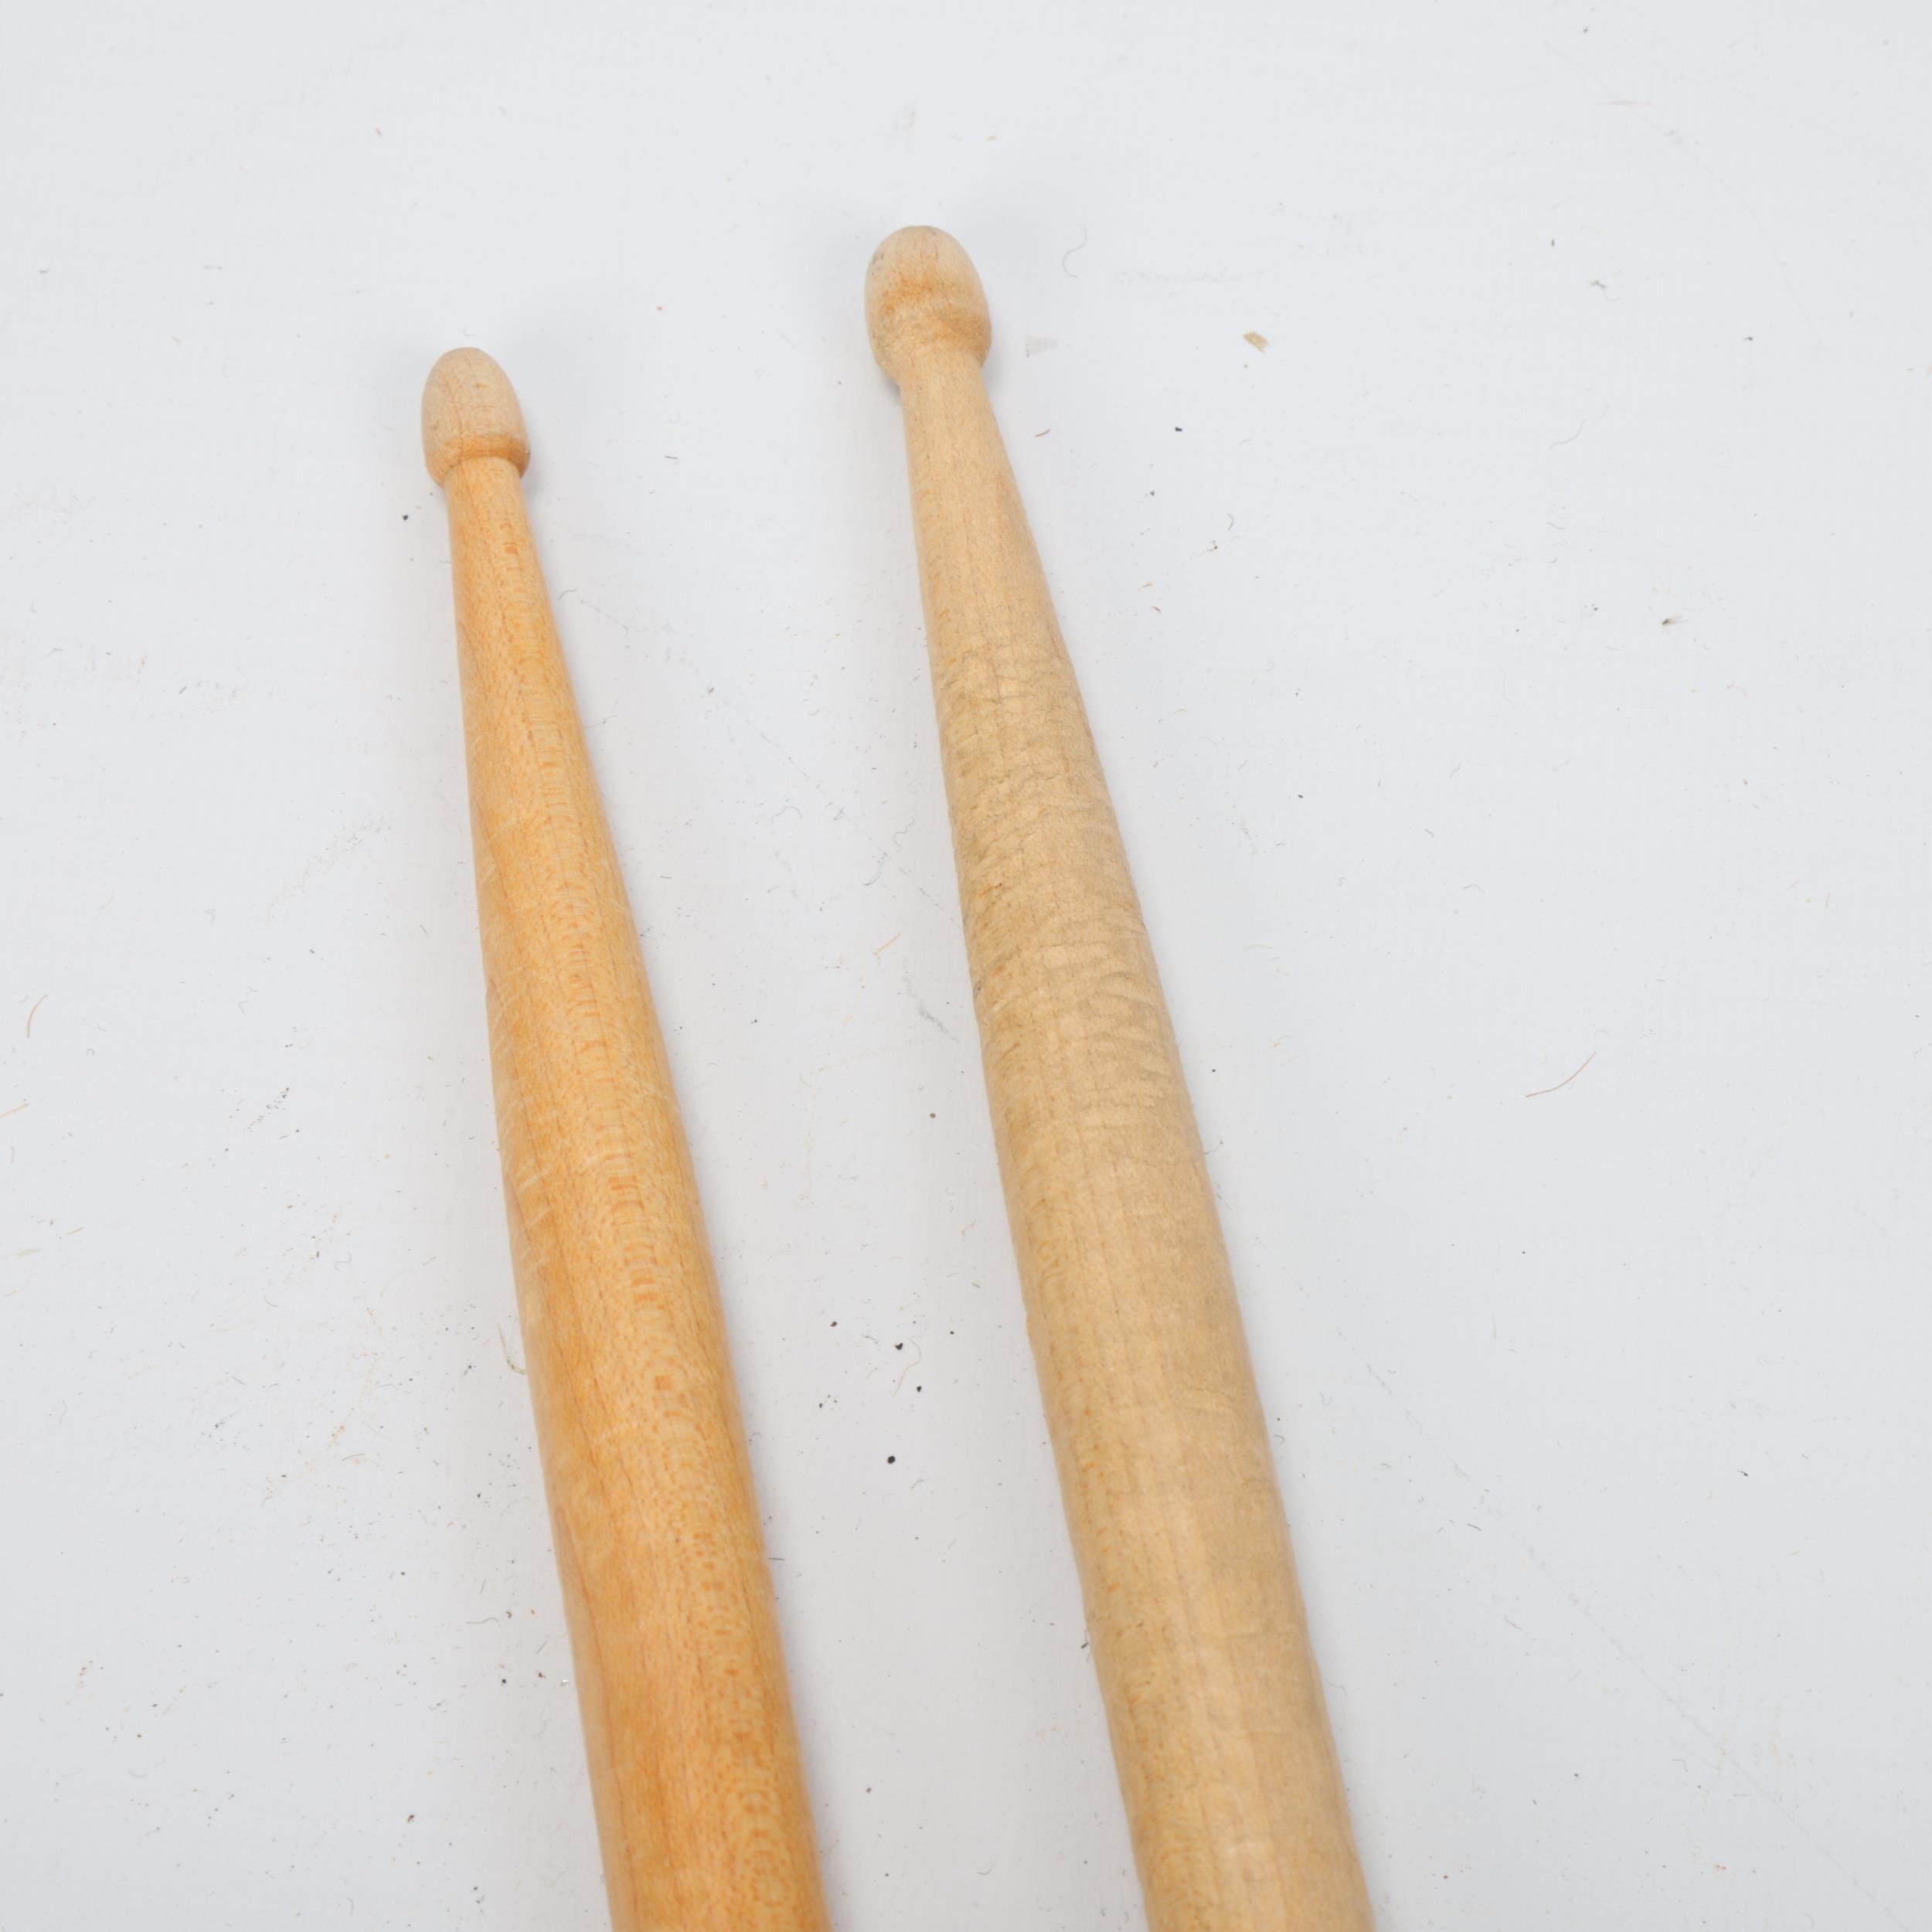 Two USED KIT TOOLS KT Hickory DRUMSTICKS belonging to MITCH MITCHELL - Image 3 of 3